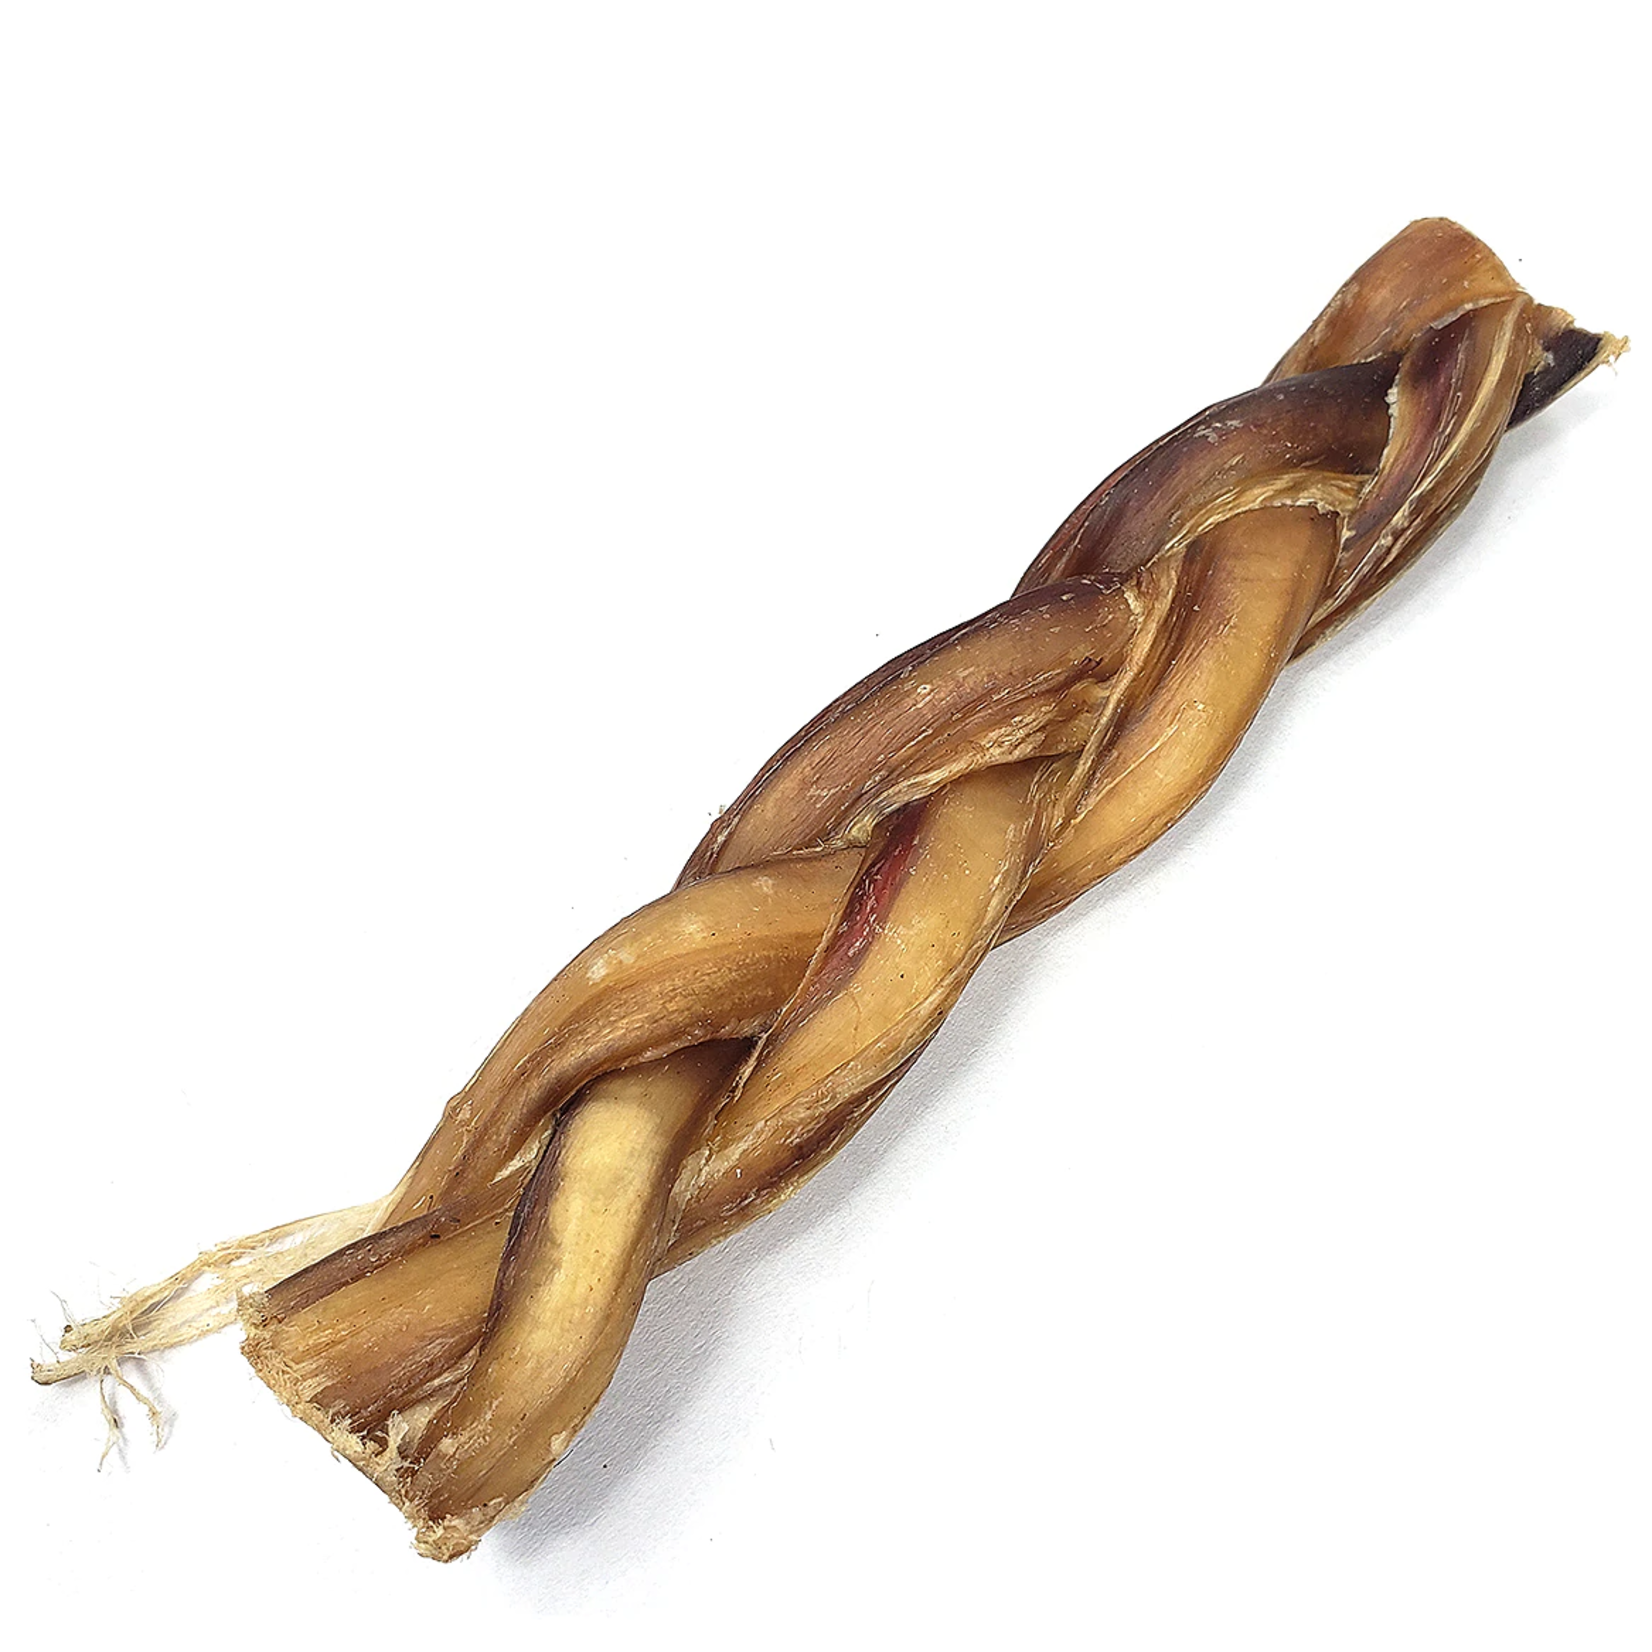 Tuesday's Natural Dog Company 6" Braided Bully Stick